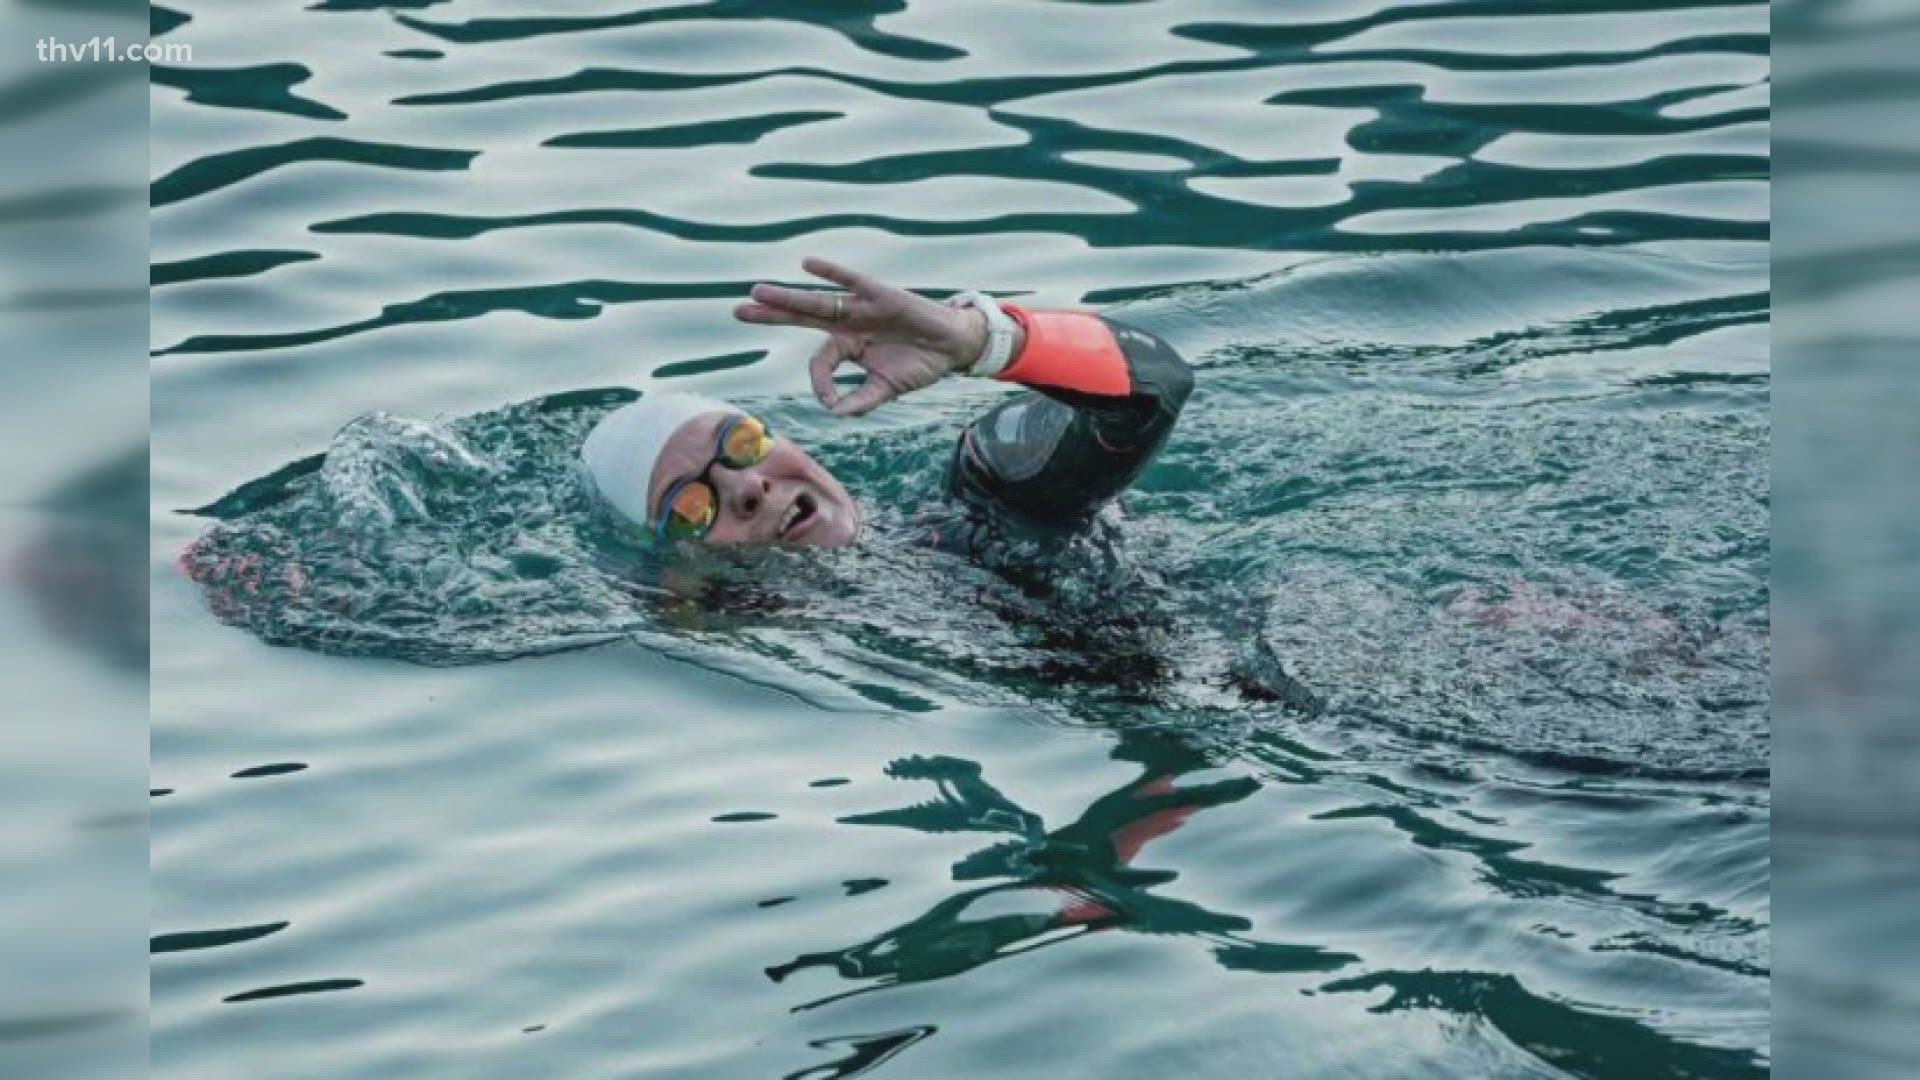 Andrea Mason is the first woman to complete a ‘Sea to Summit’ triathlon in just five days. Her goal is to raise awareness of cervical cancer.